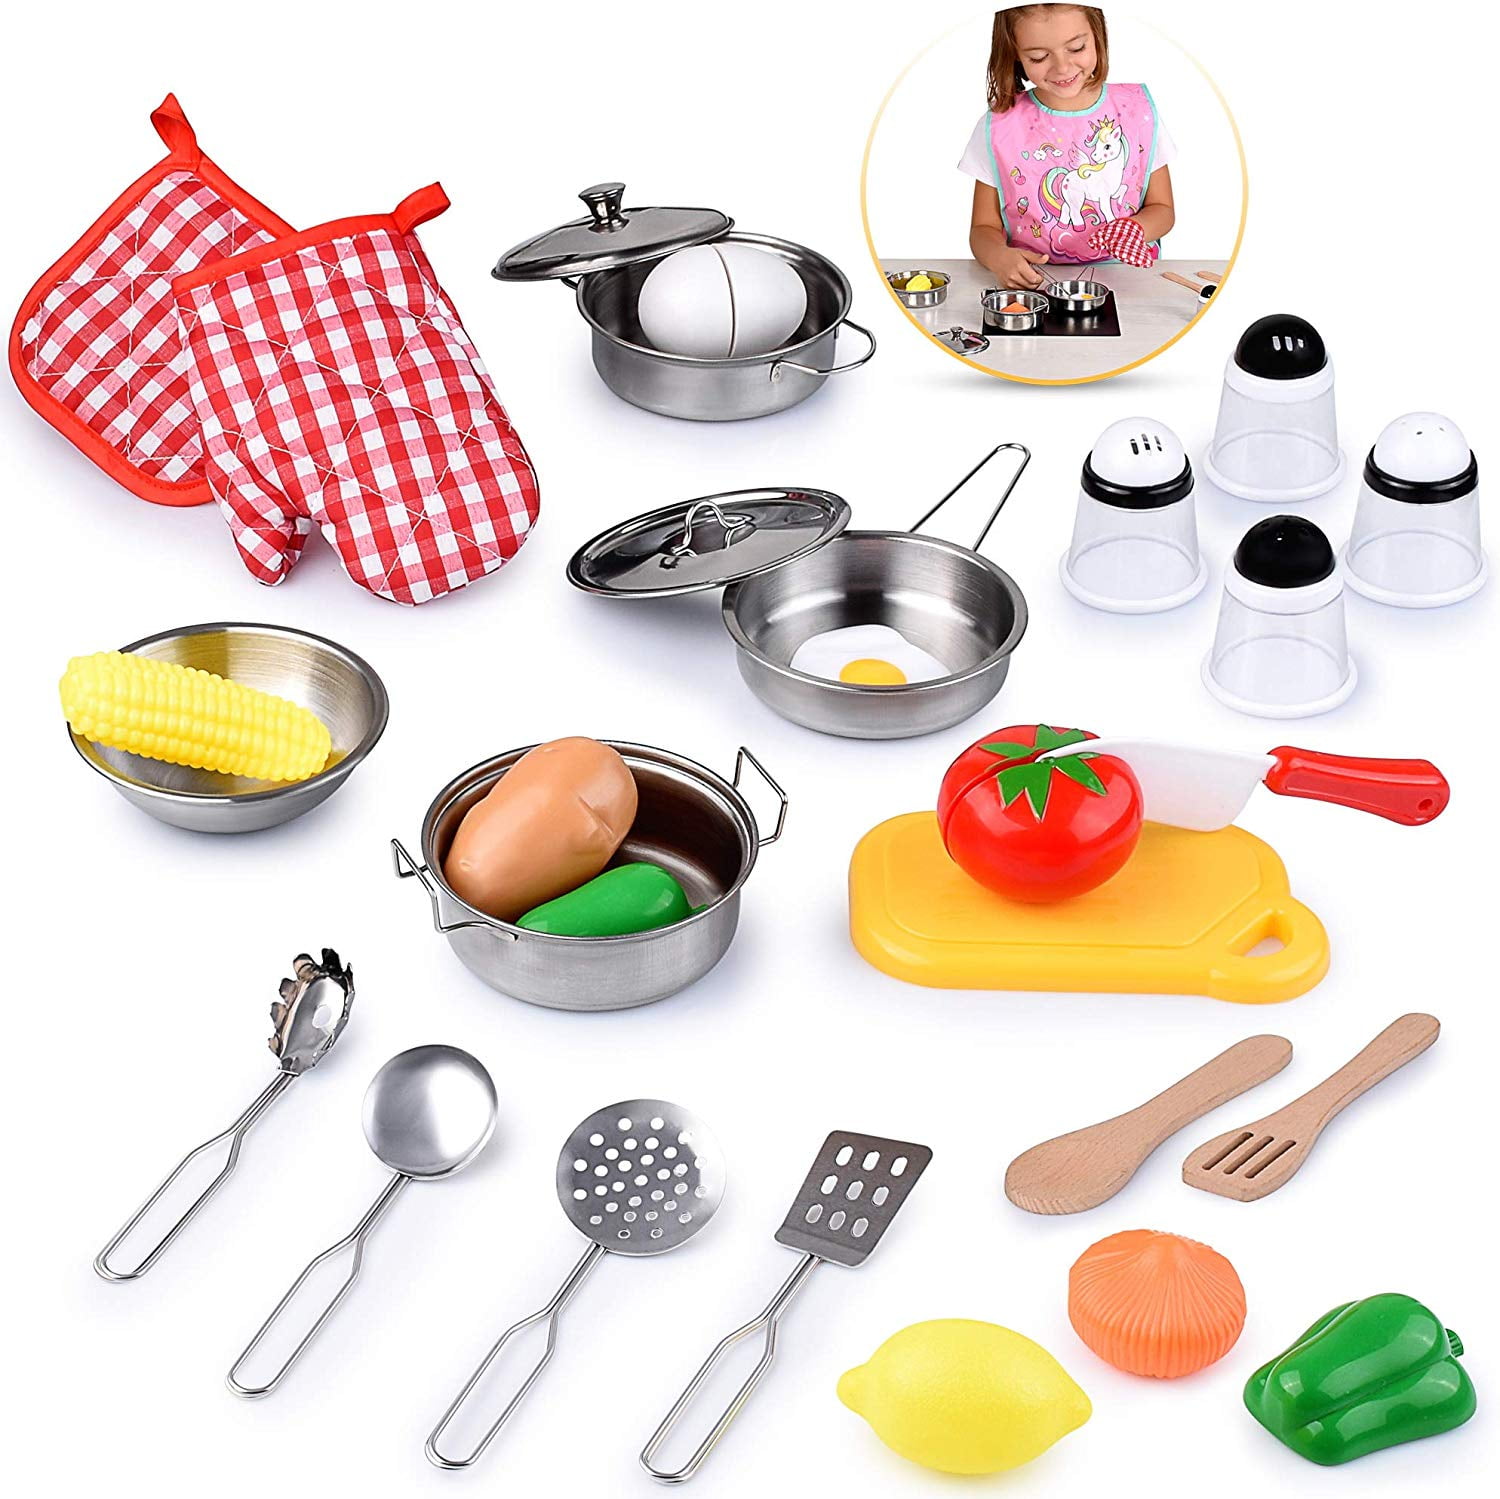 25pc Children Kids Kitchen Utensils Pots Pans Play Toys Dishes Food Cook Cooking 